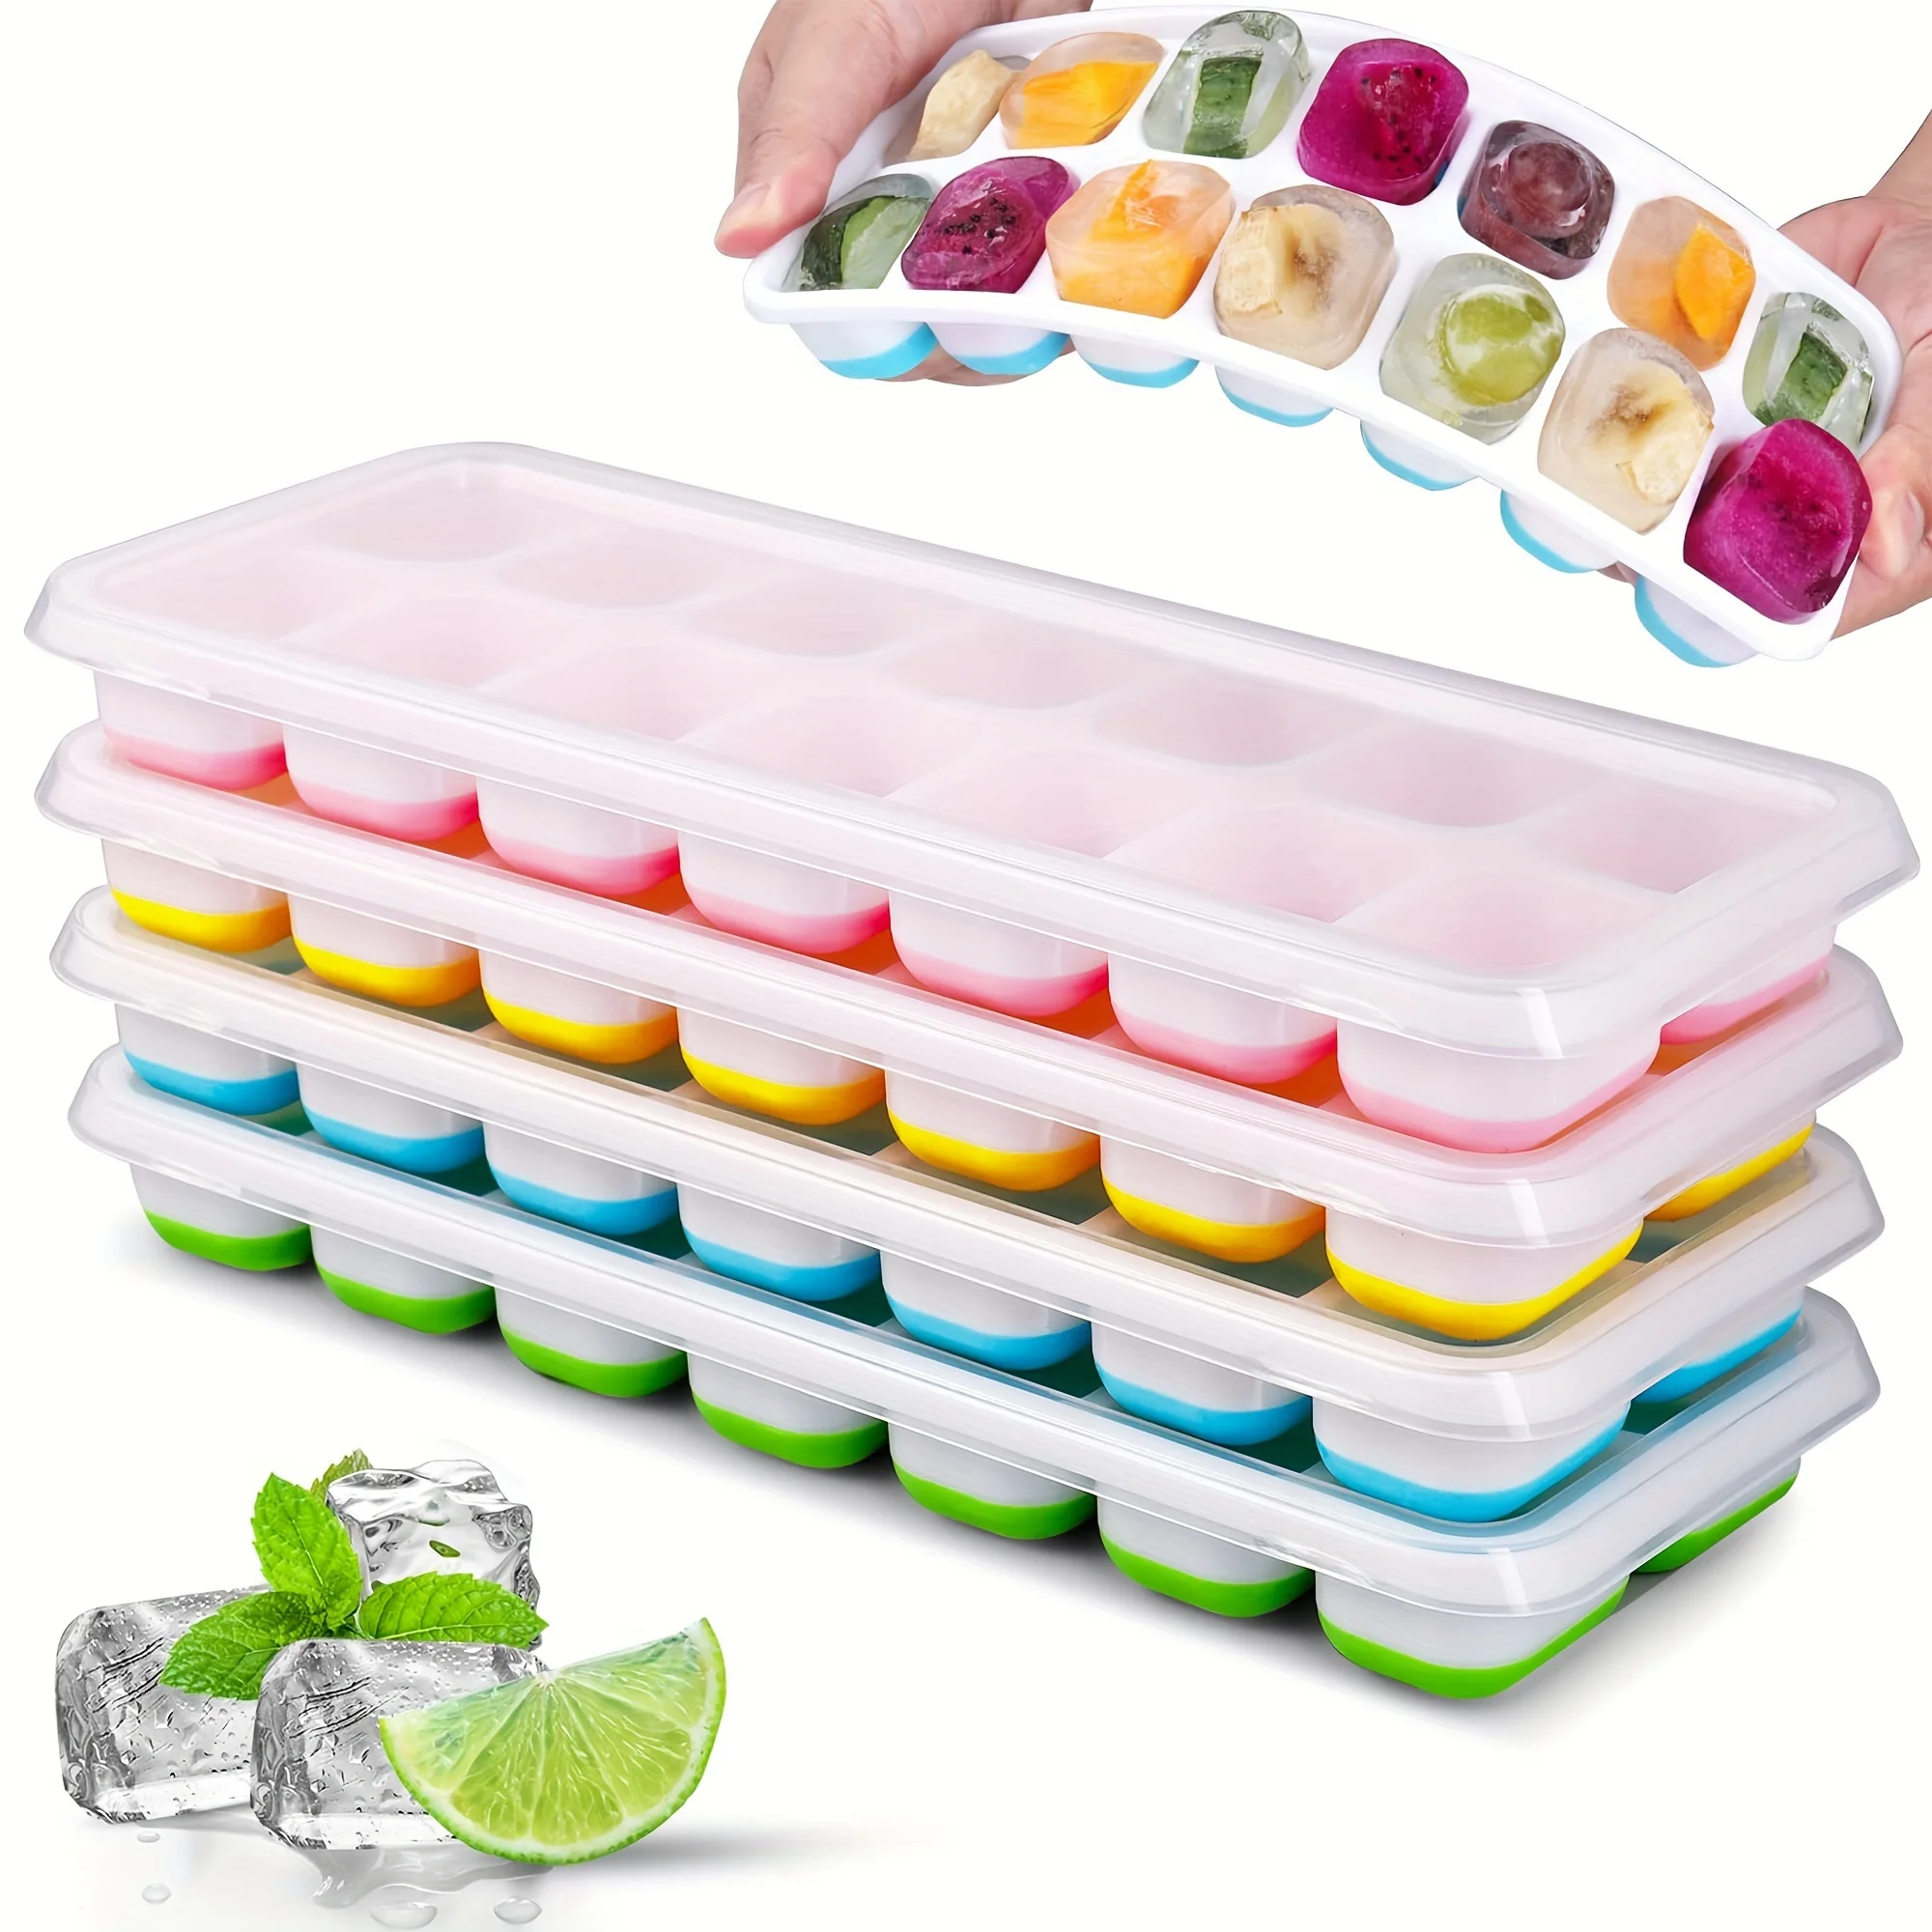 1pcs, Silicone Ice Cube Mold, Easy-Release & Flexible Mold With Spill-Resistant Removable Lid, Stackable Ice Trays With Covers